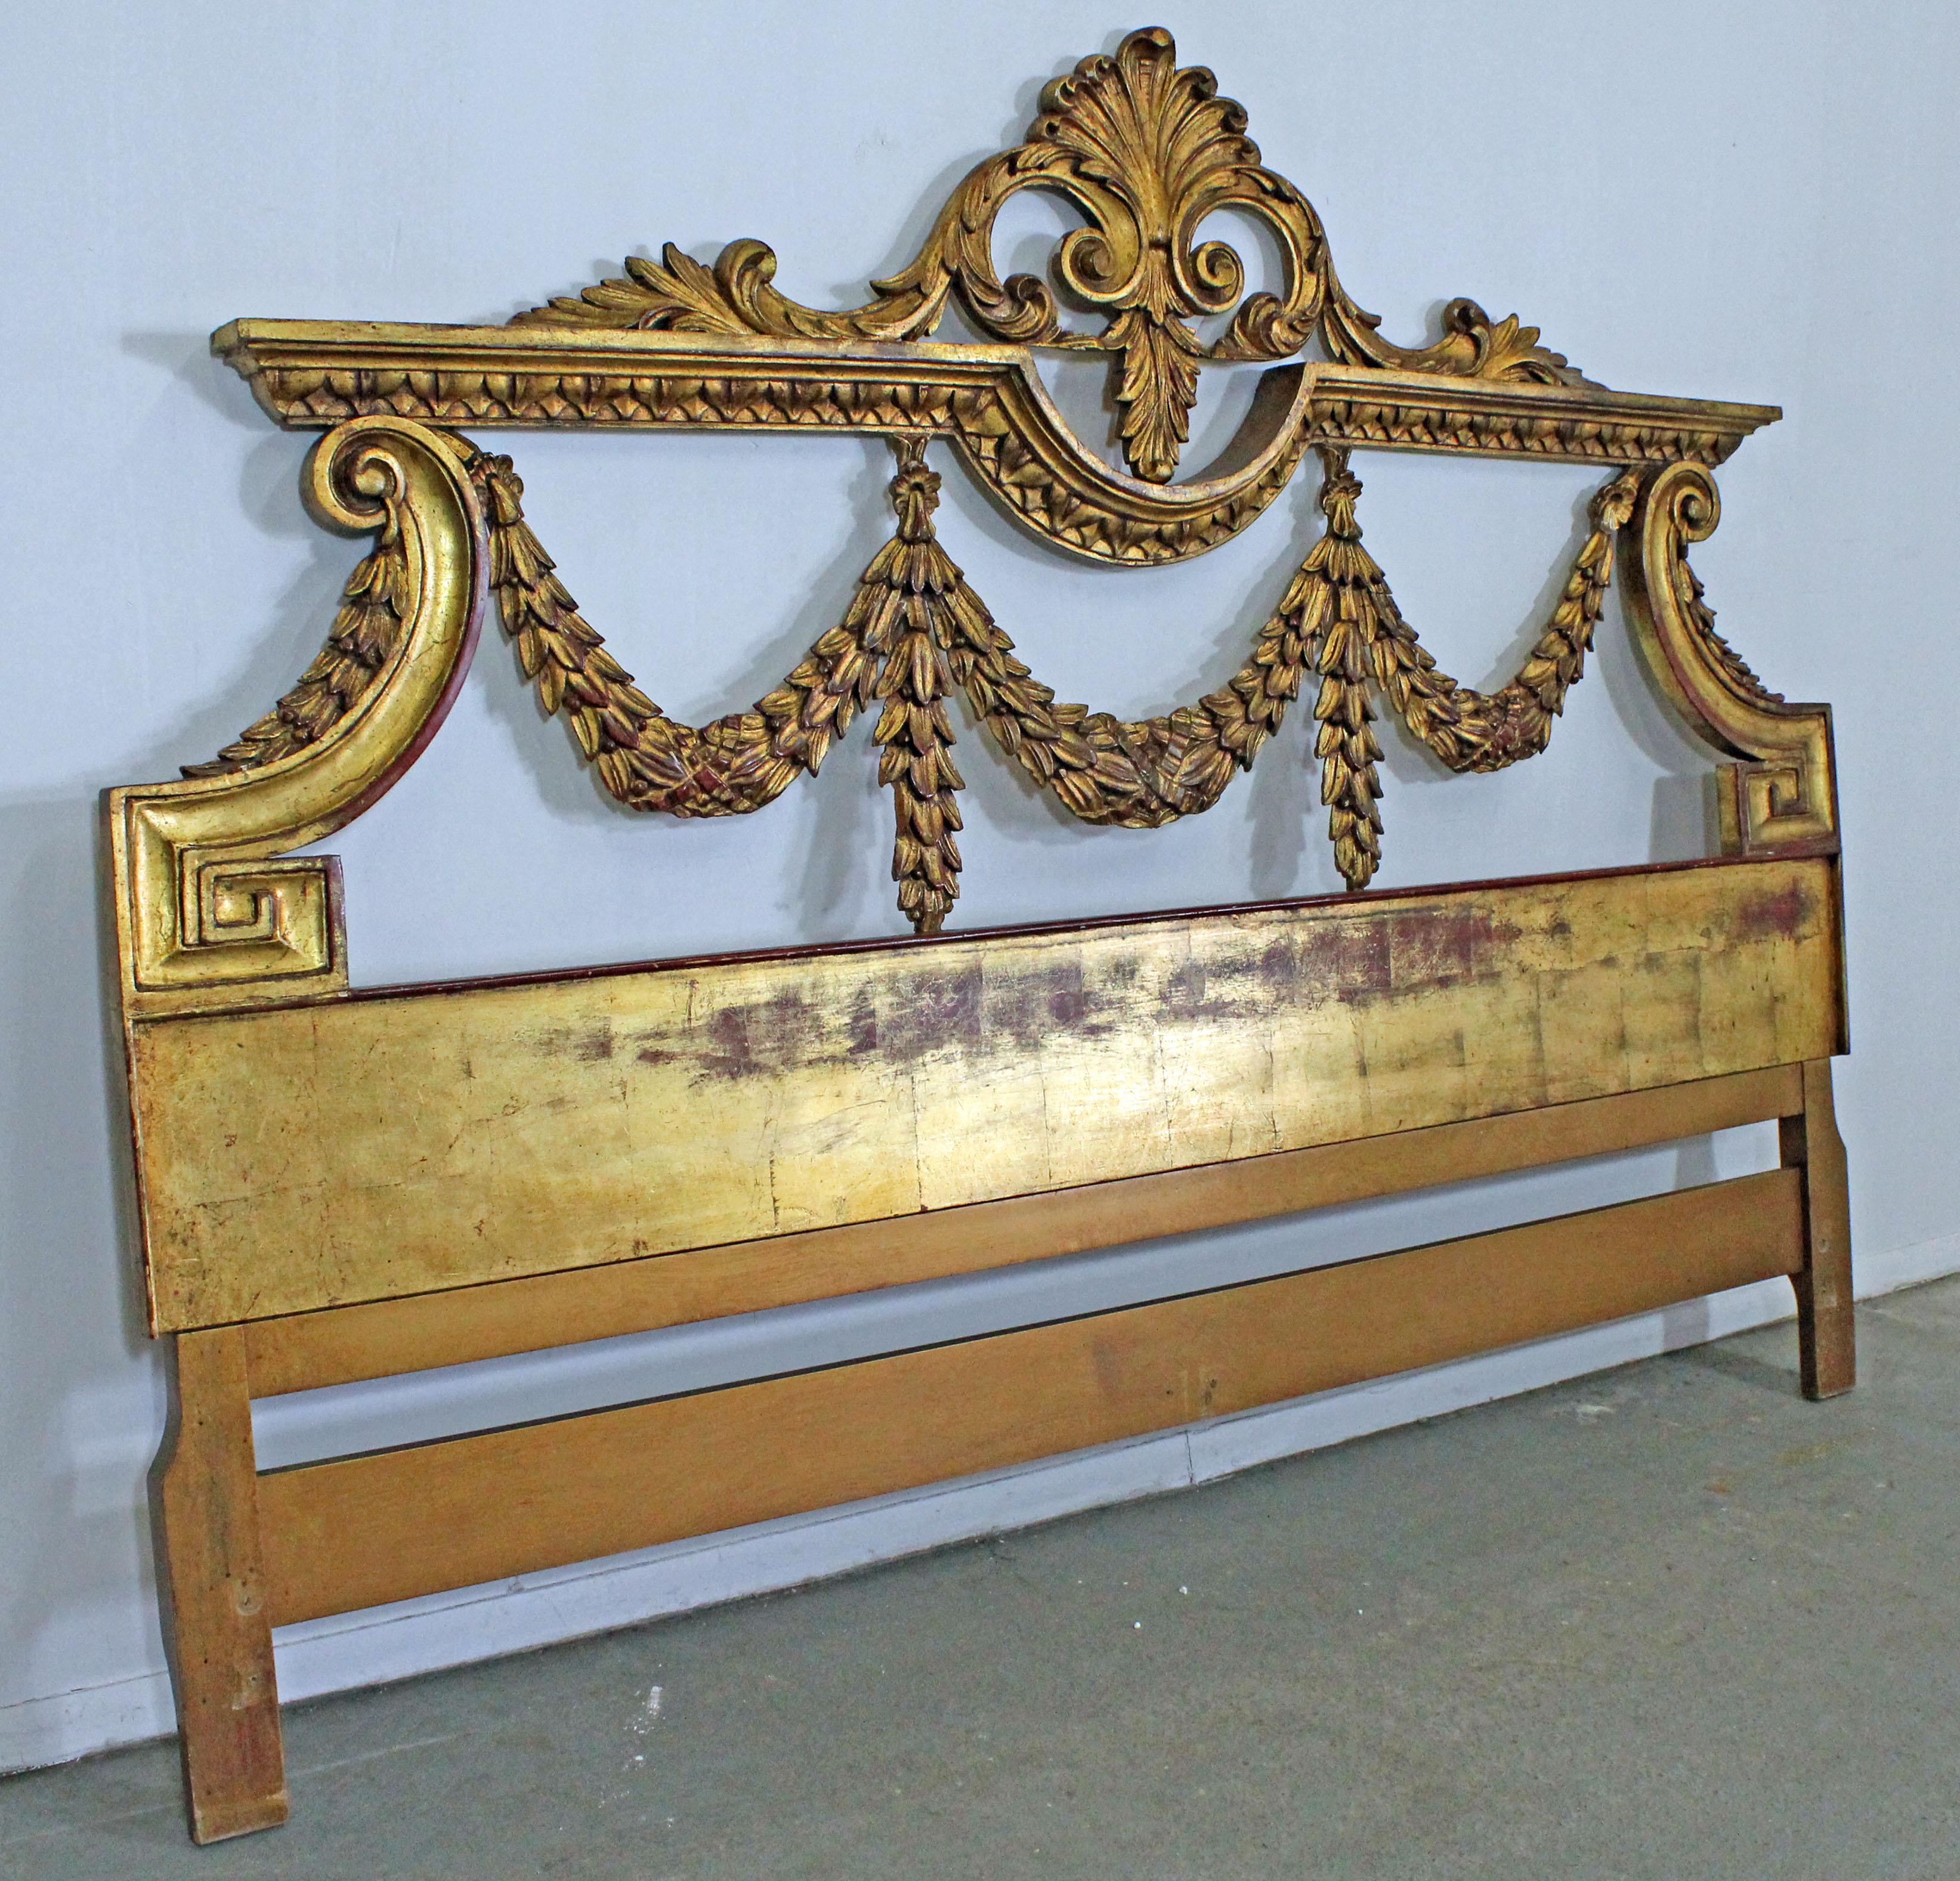 Offered is a gorgeous Louis carved XV style gold-gilded headboard with an antique look. Features a fleur-de-lis design and fits a king size mattress. In good condition, showing some age wear (see photos & condition). It is not signed.

Dimensions: